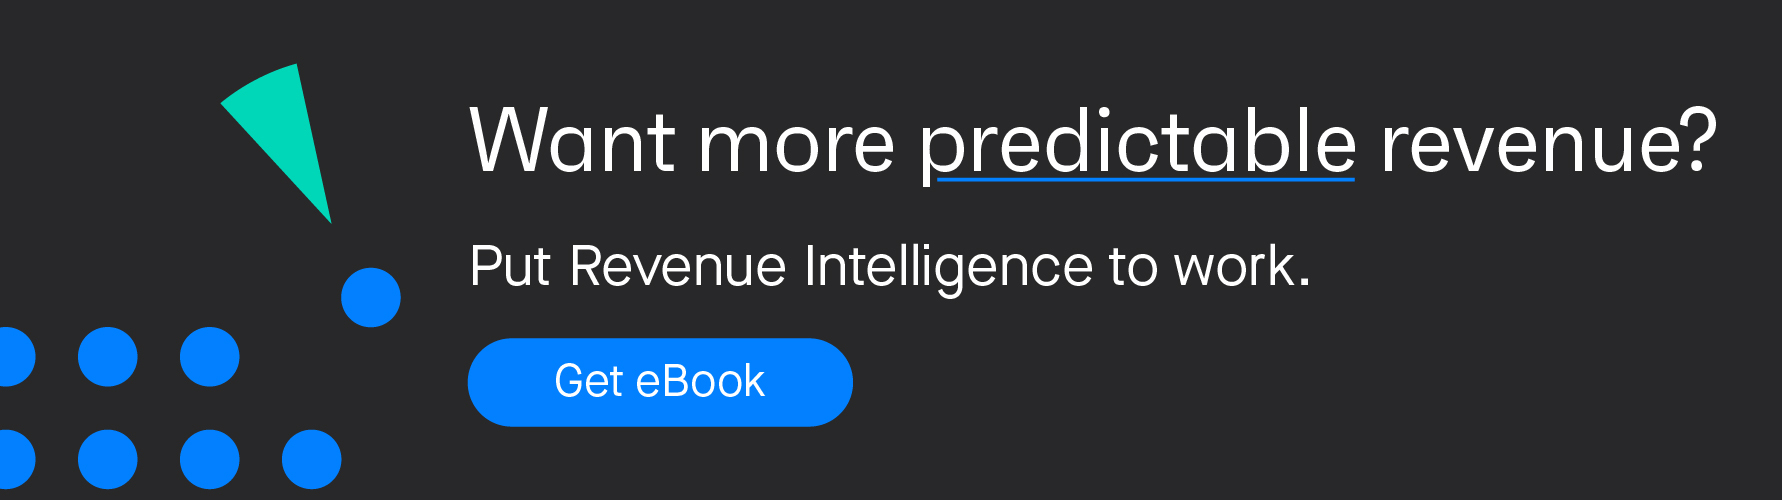 Banner image that says Want more predictable revenue? Put Revenue Intelligence to work